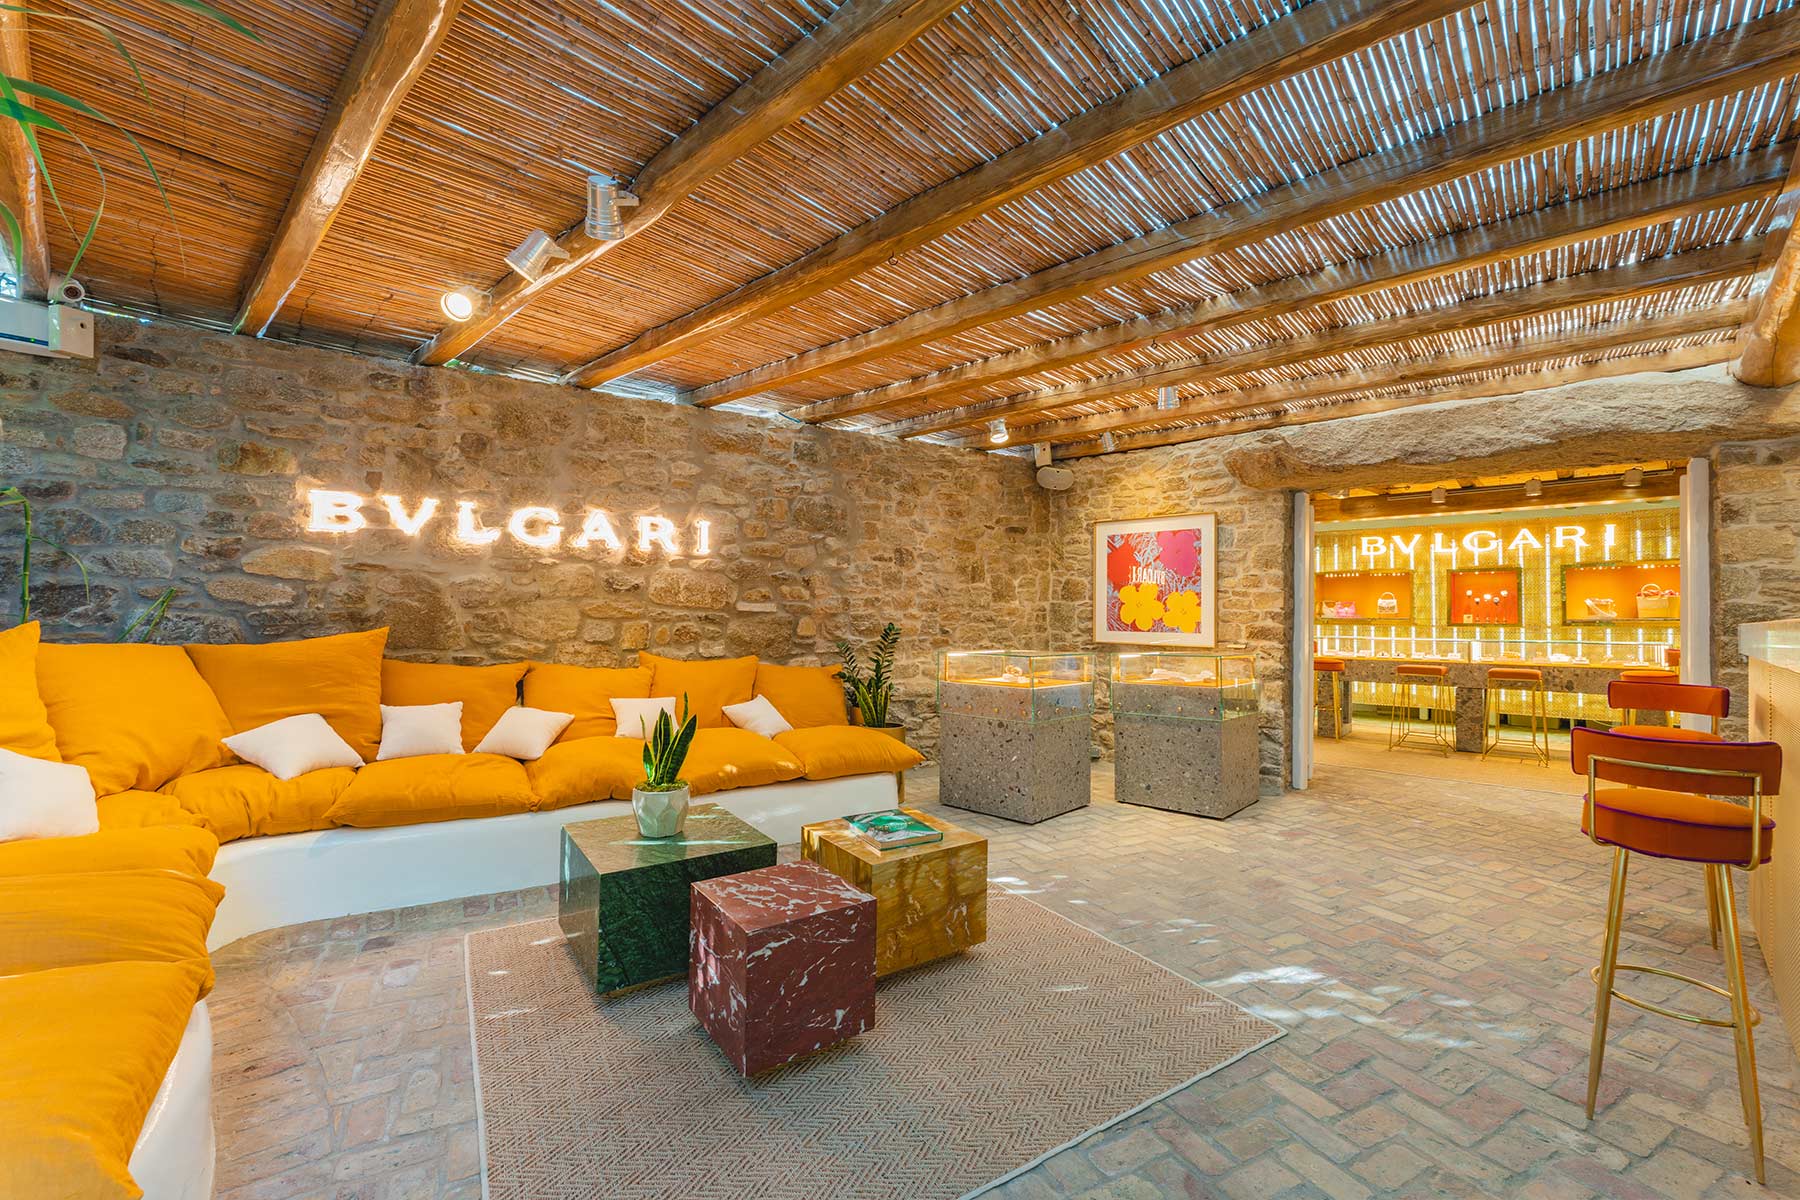 Bulgari pop up store on Mykonos seen in a photo from the Nammos